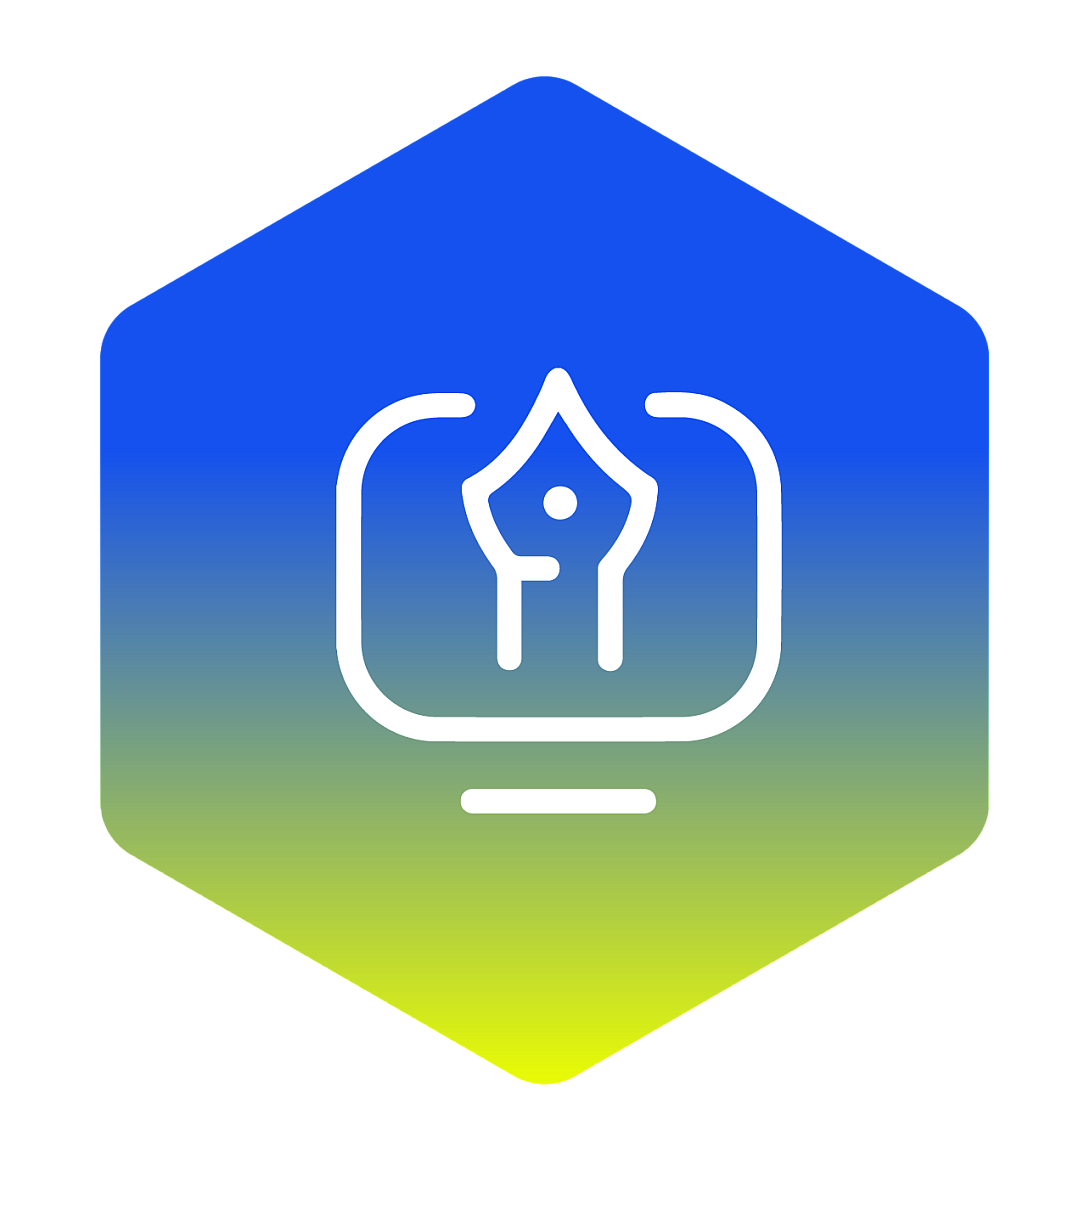 build application icon in an polygon